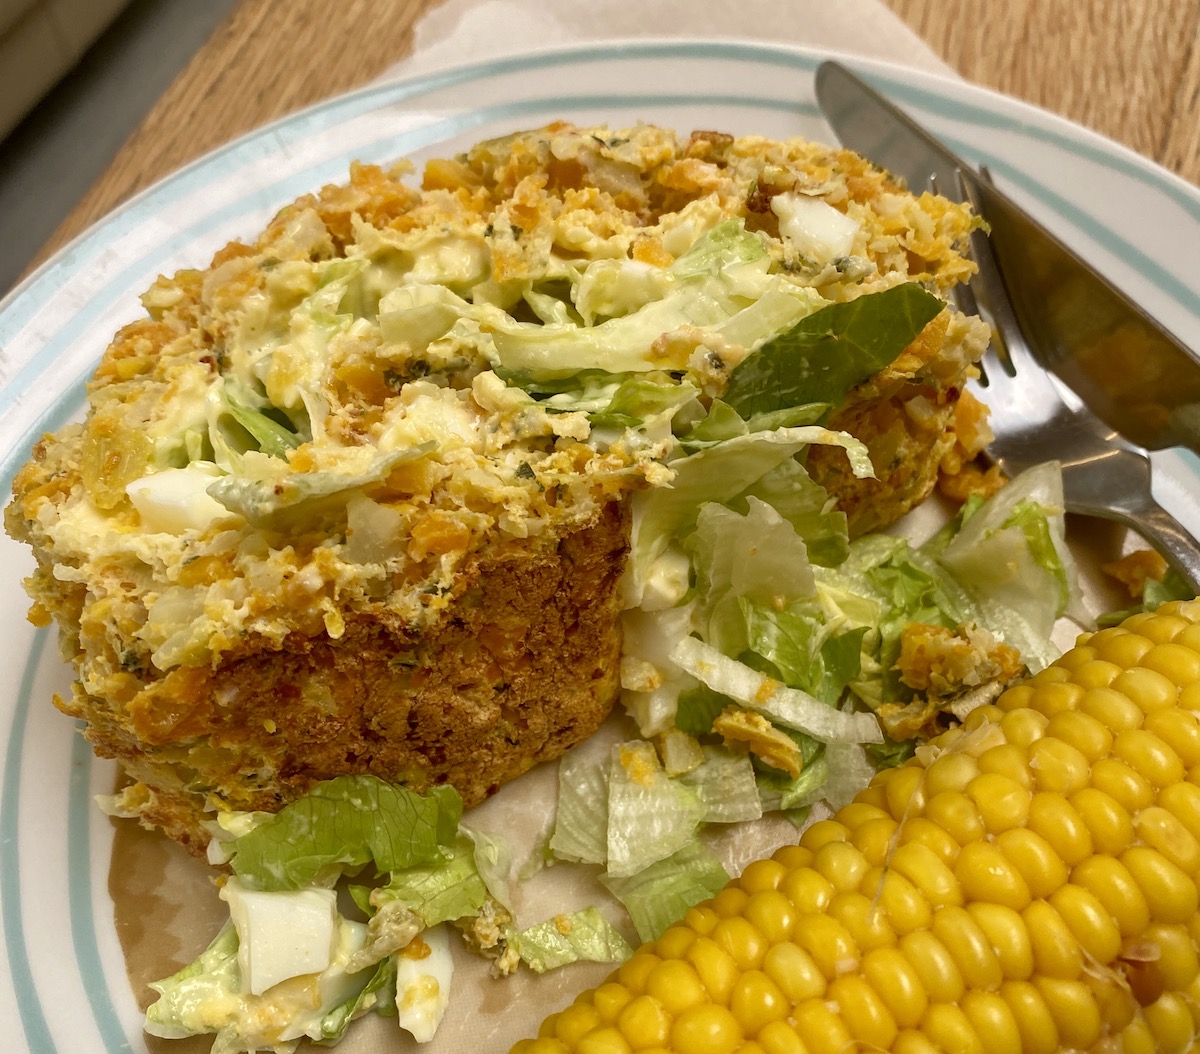 a slice of vegetable roulade on a plate with a corn cob.